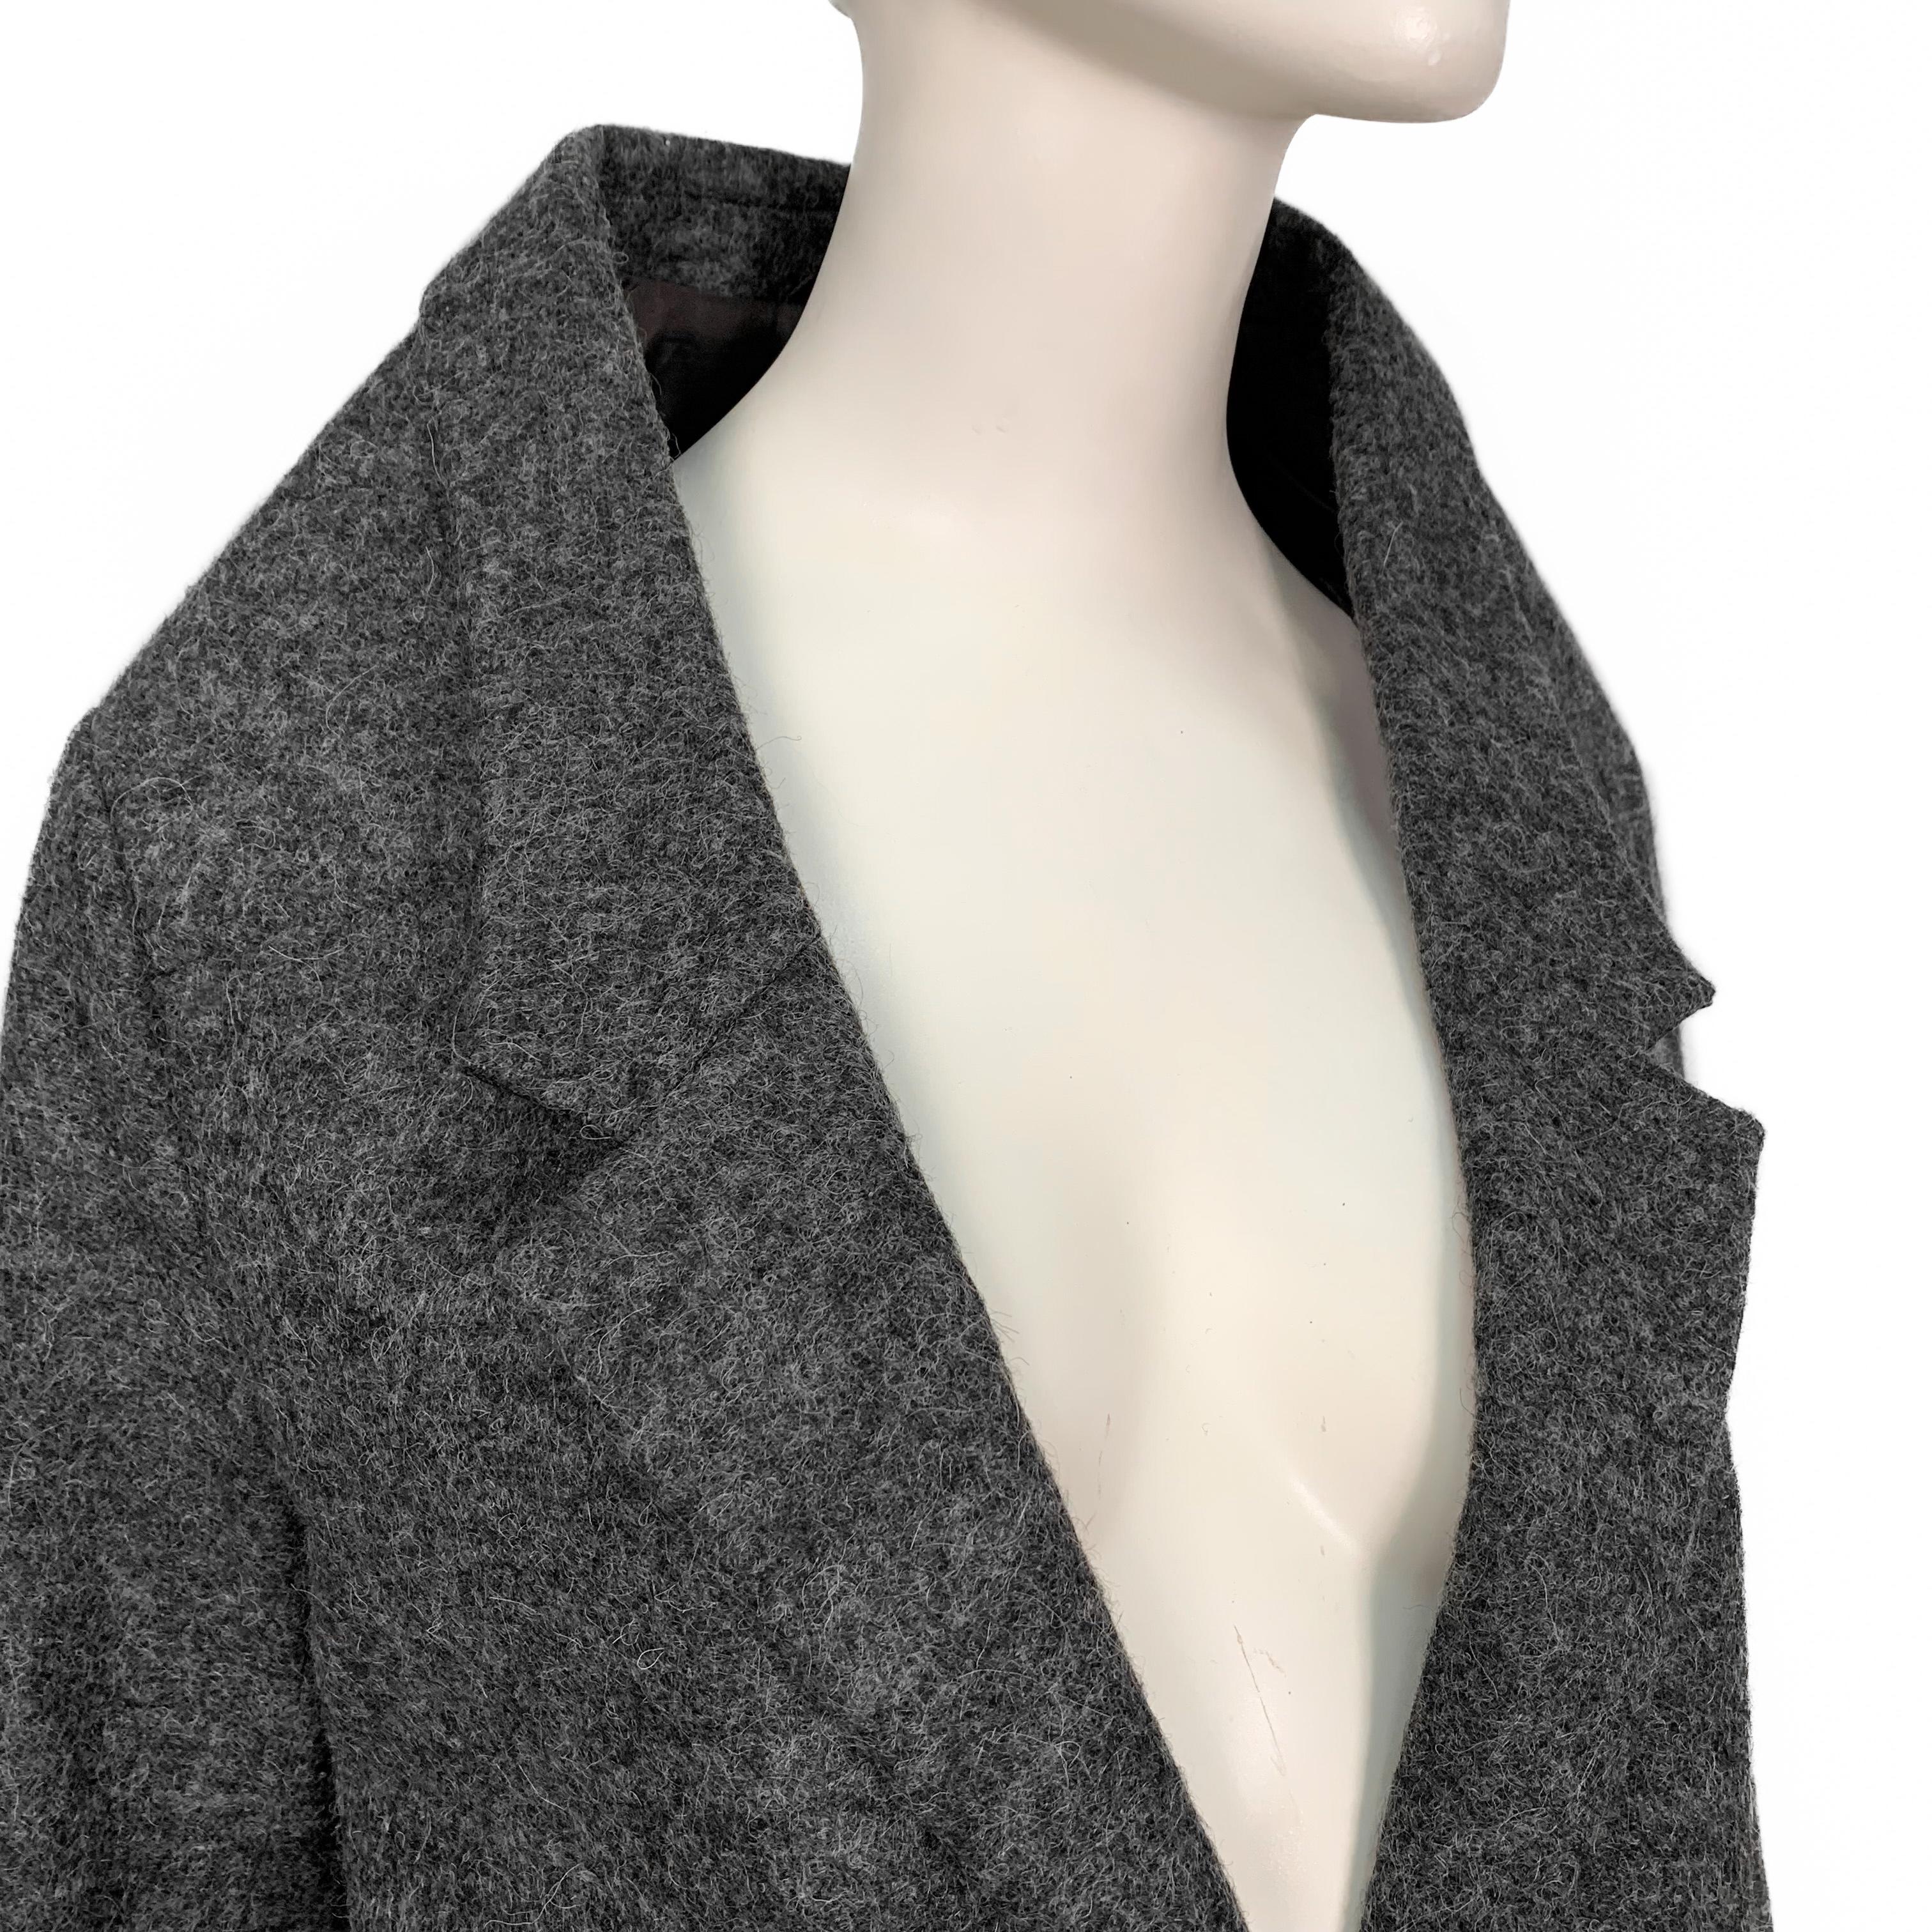 Women's AW 2010 mr. Margiela's last RTW collection grey wool deconstructed blazer For Sale